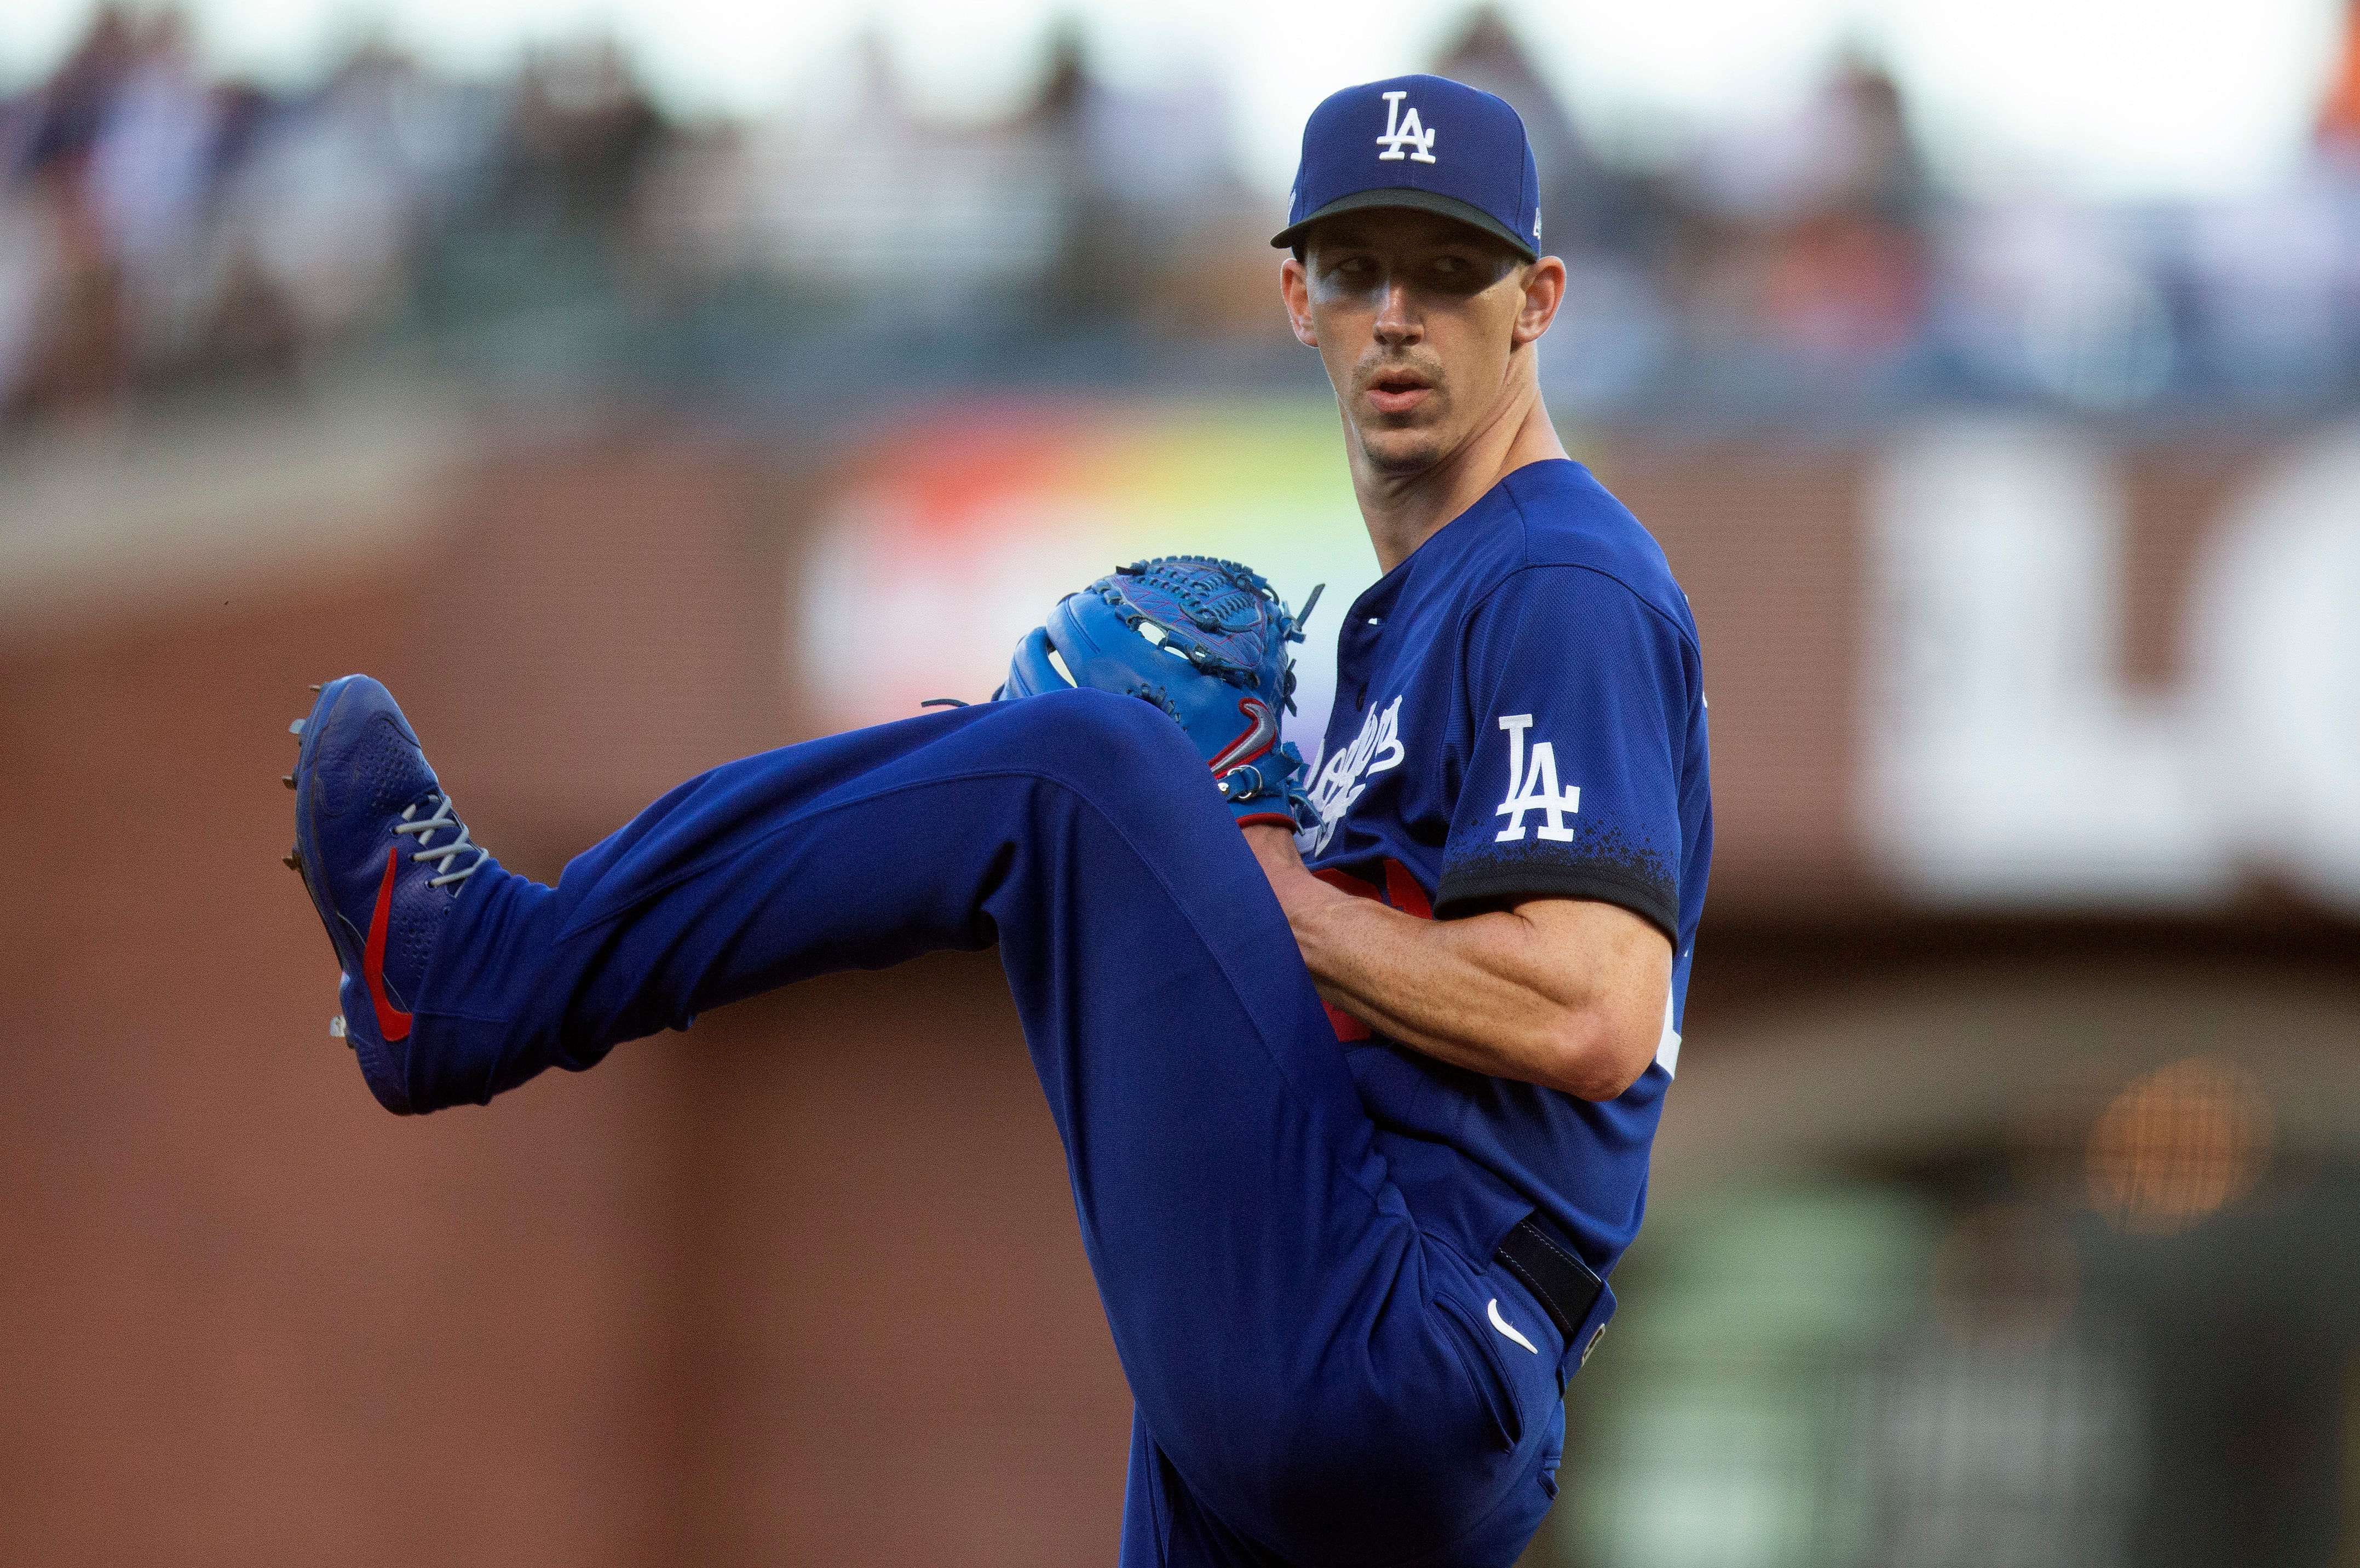 Walker Buehler is set to make his return to the mound